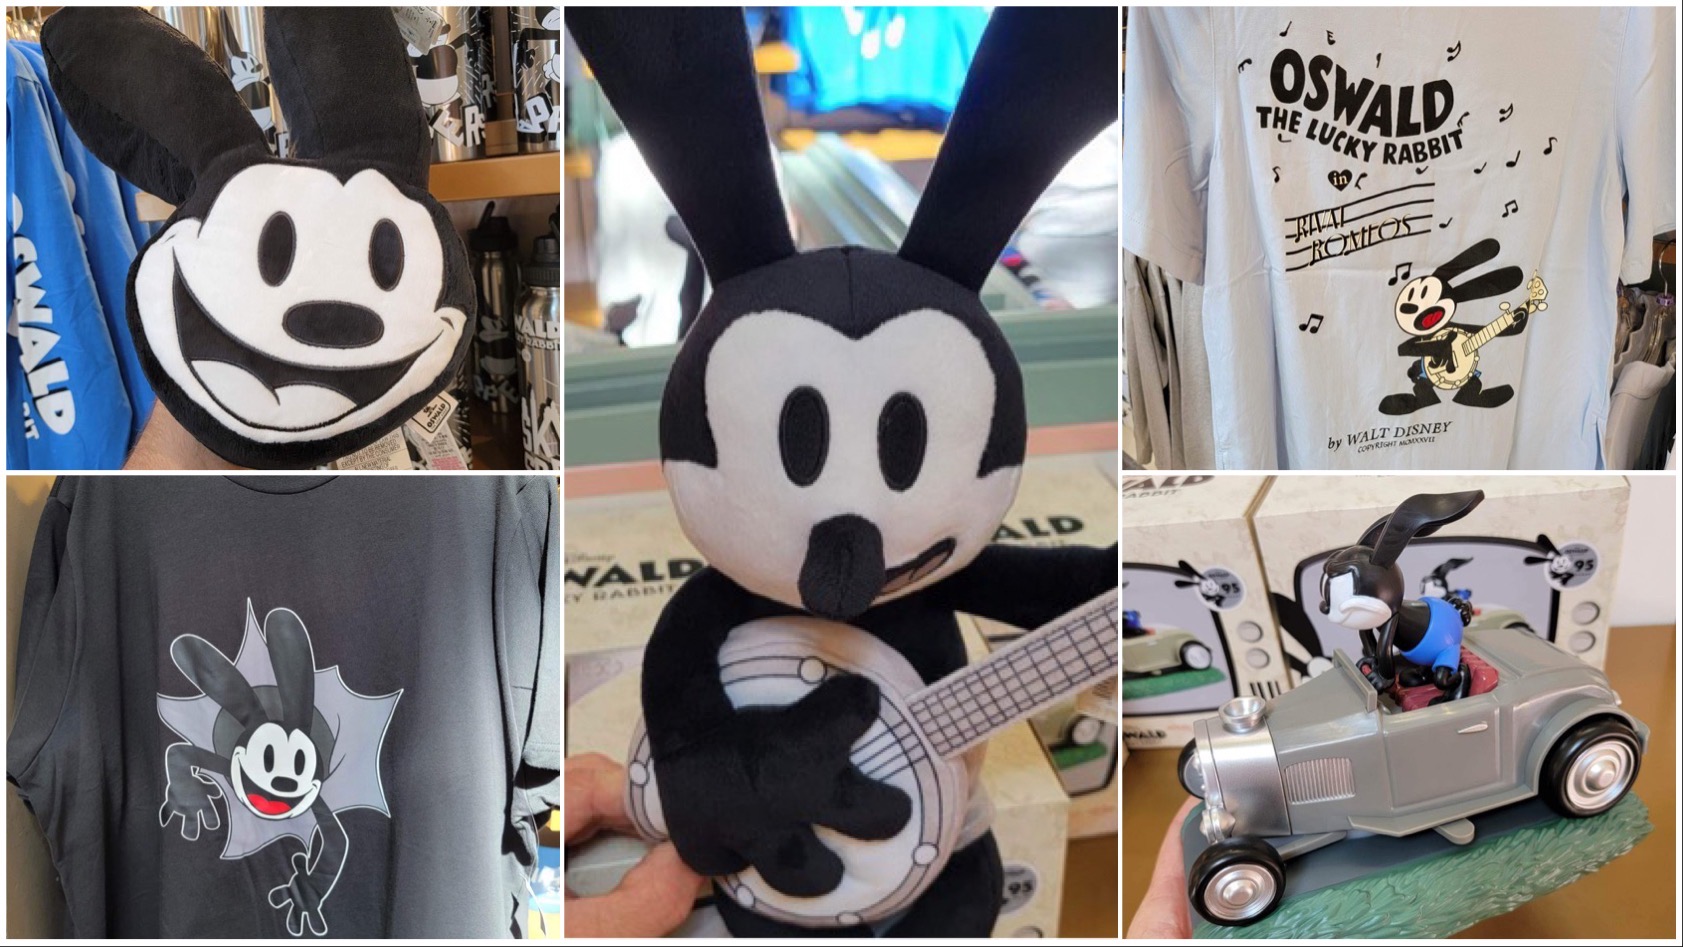 More Disney100 Oswald Merchandise Spotted At Hollywood Studios!